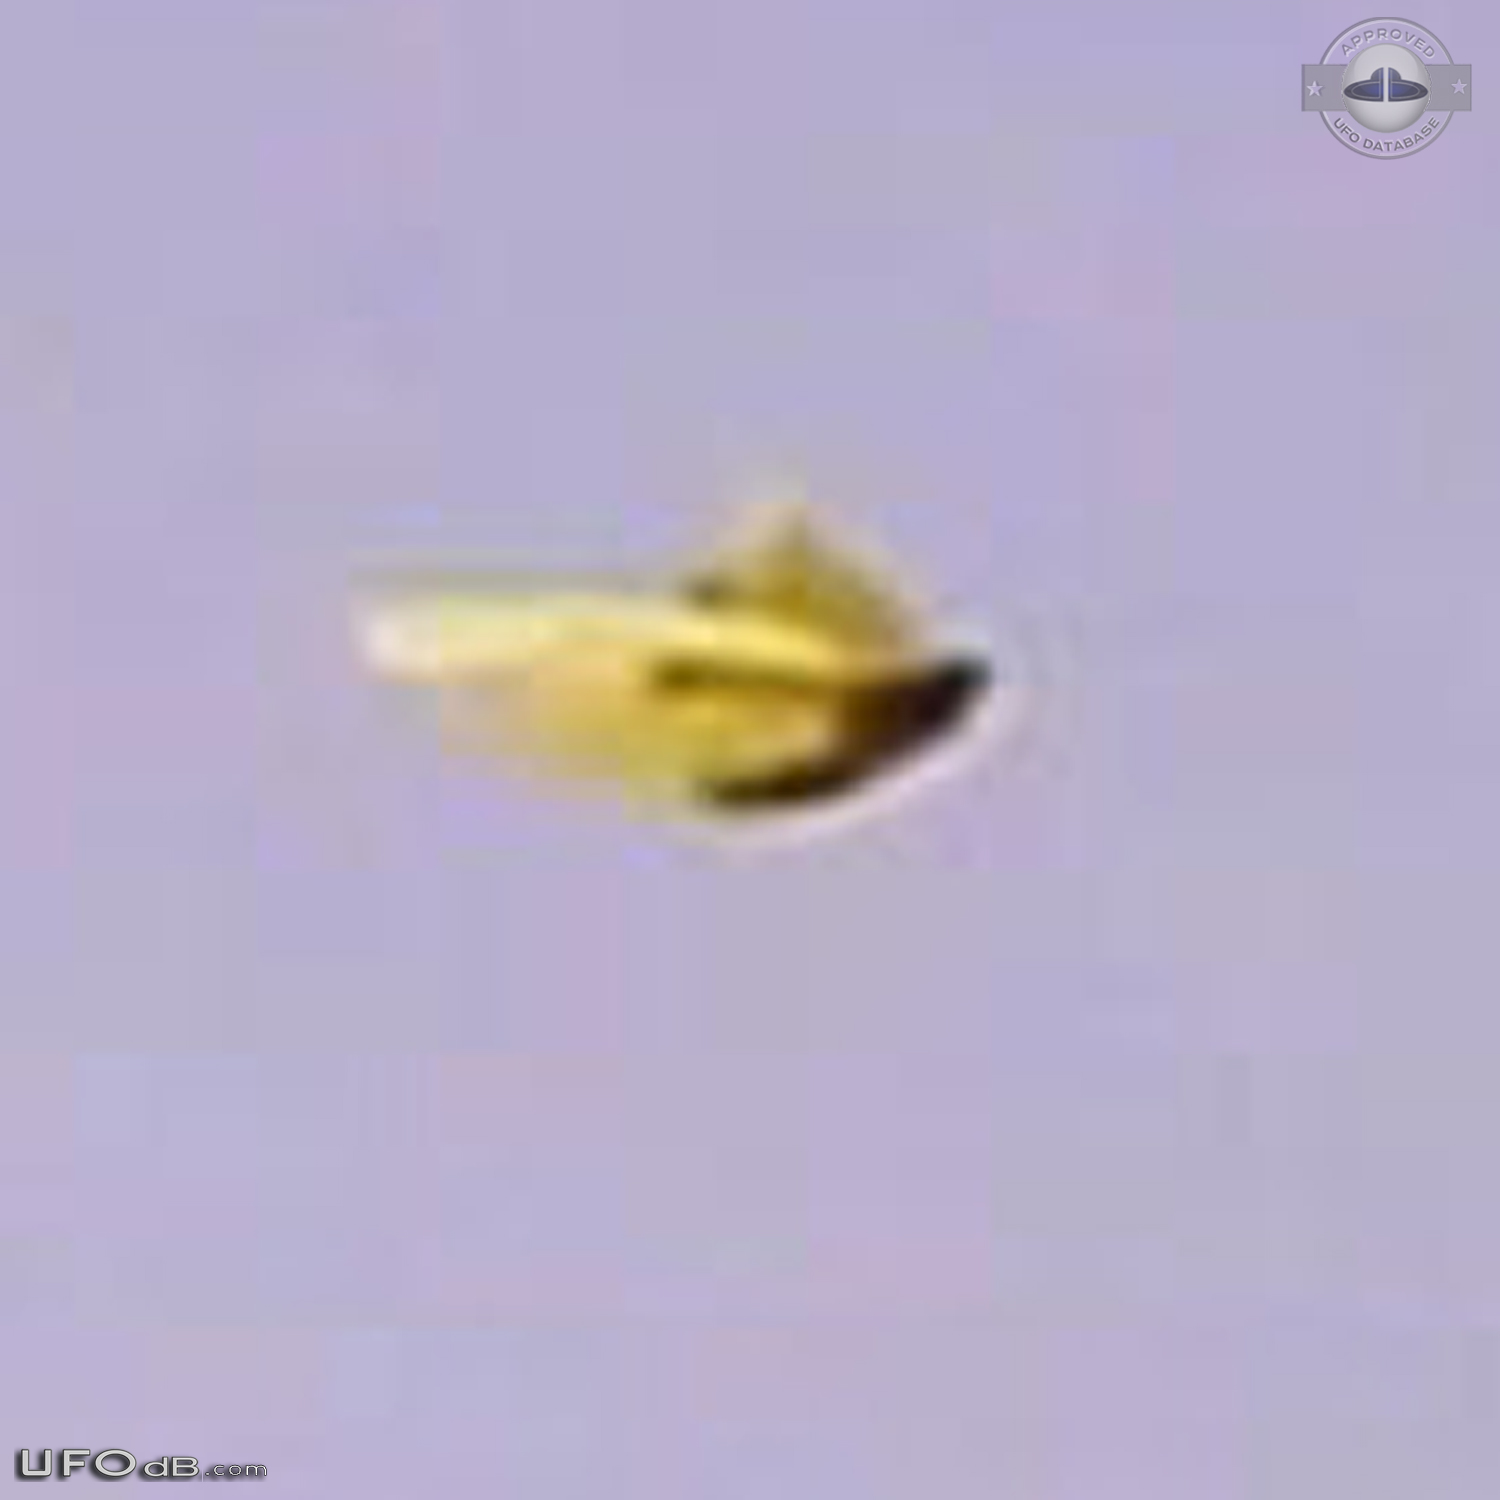 The witness stopped the car to take photos of Bahia Brazil Landscape 2 UFO Picture #709-4